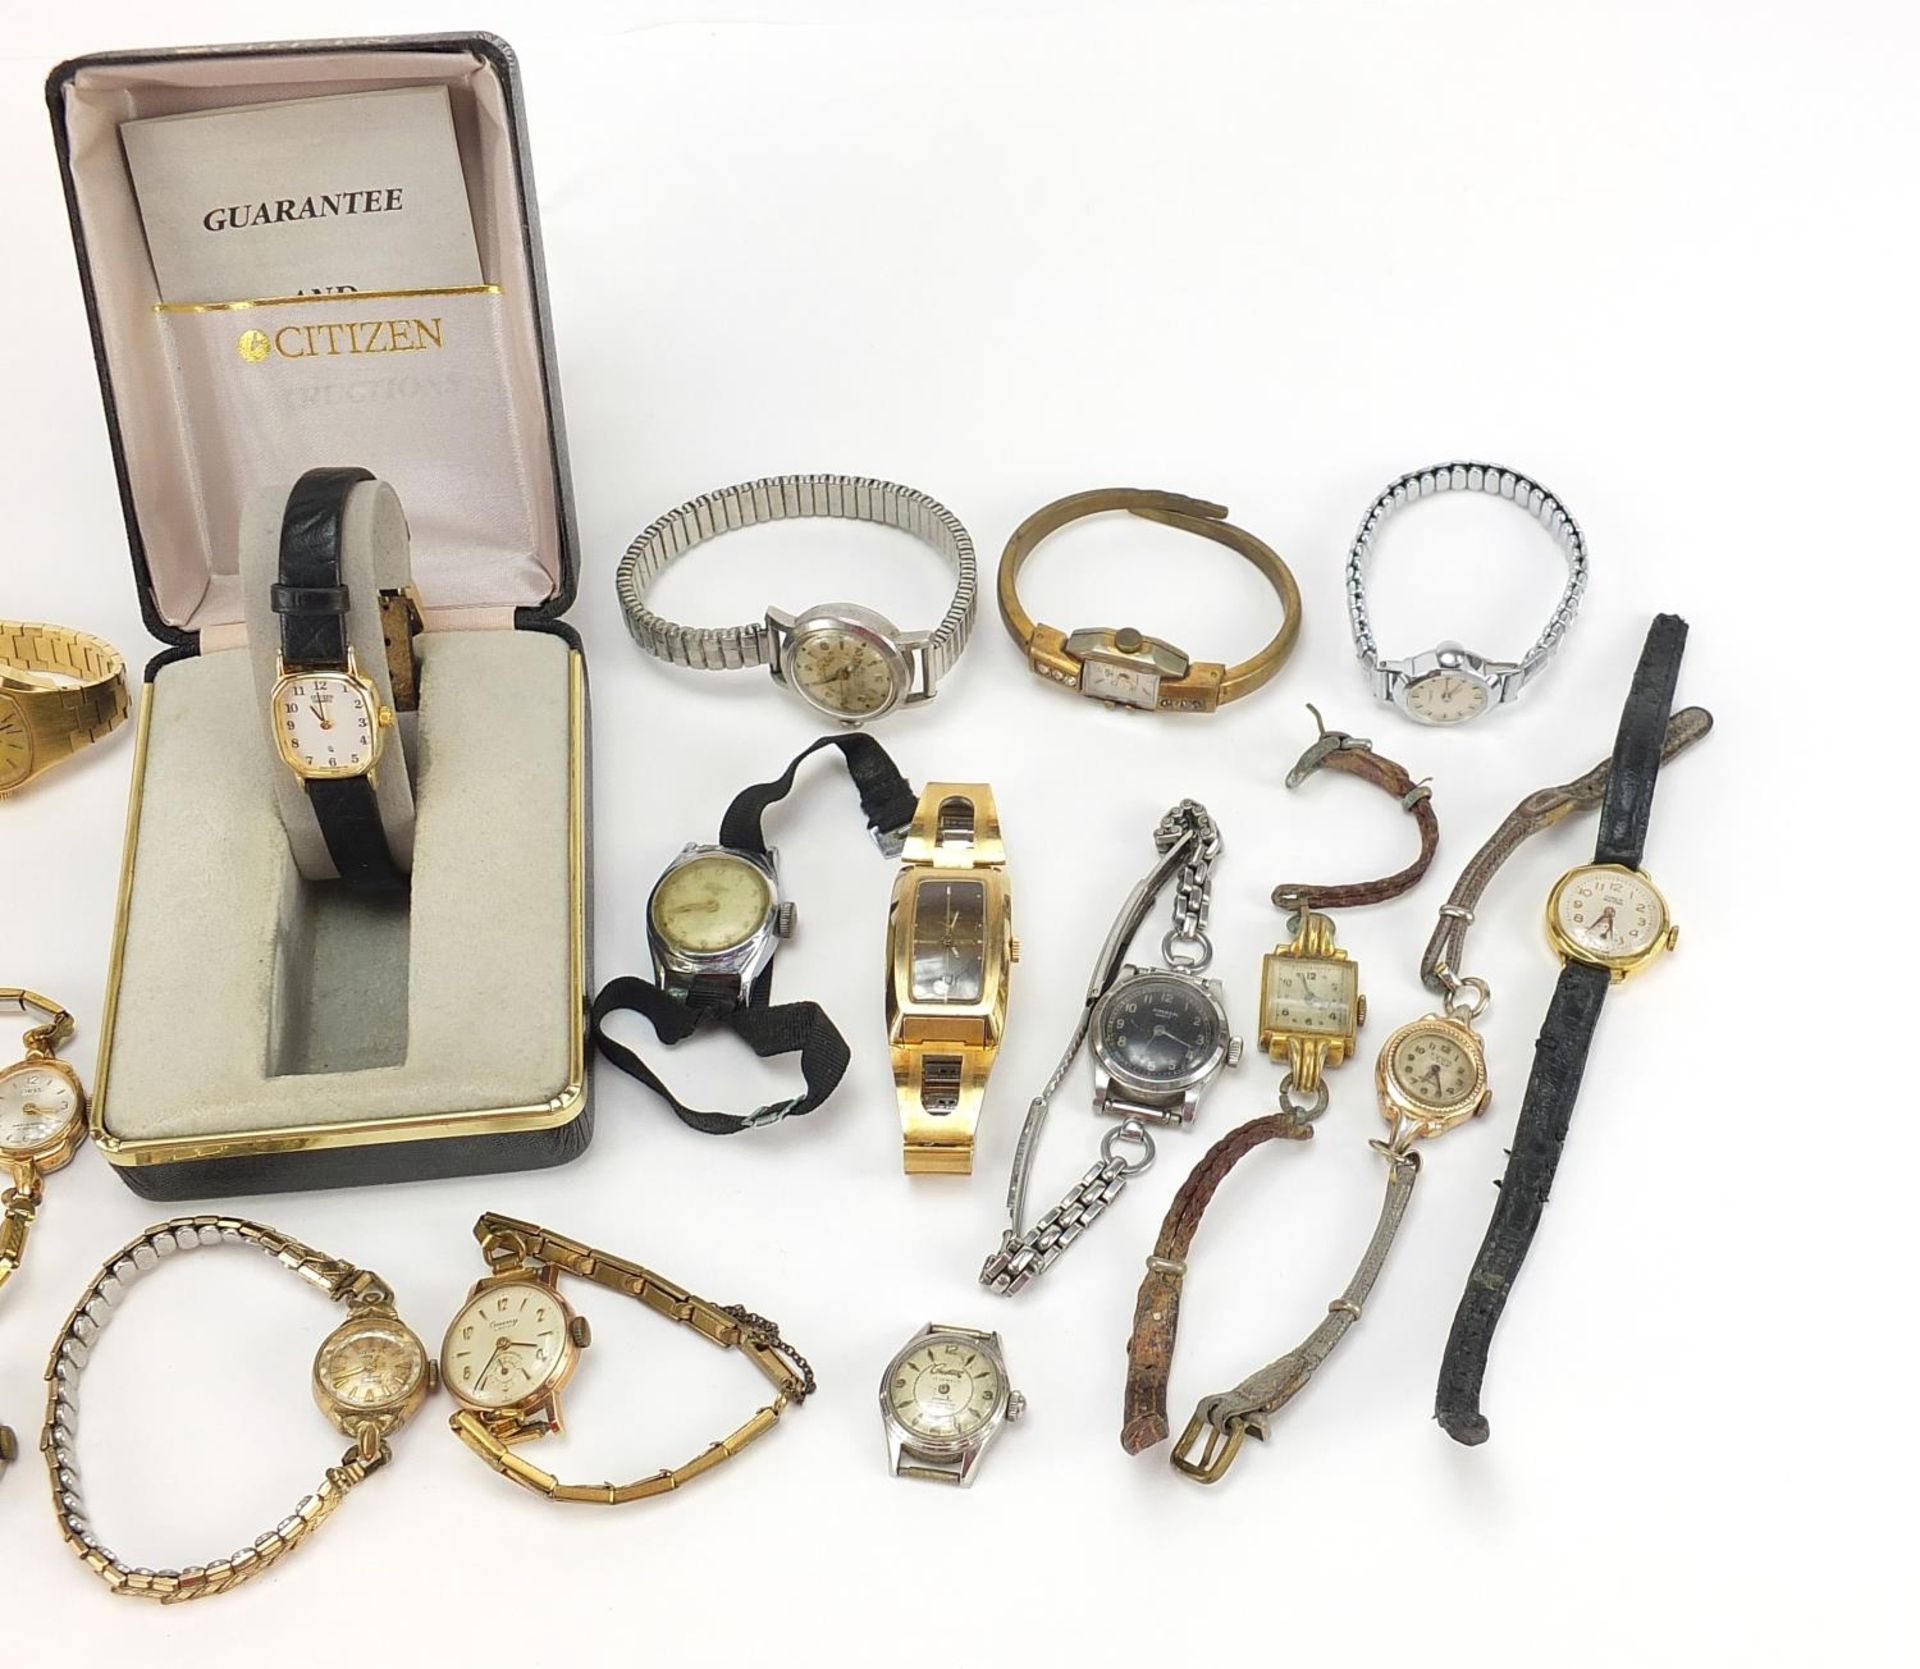 Collection of ladies vintage wristwatches including Oris, Citizen and Seiko High-Beat - Image 3 of 3